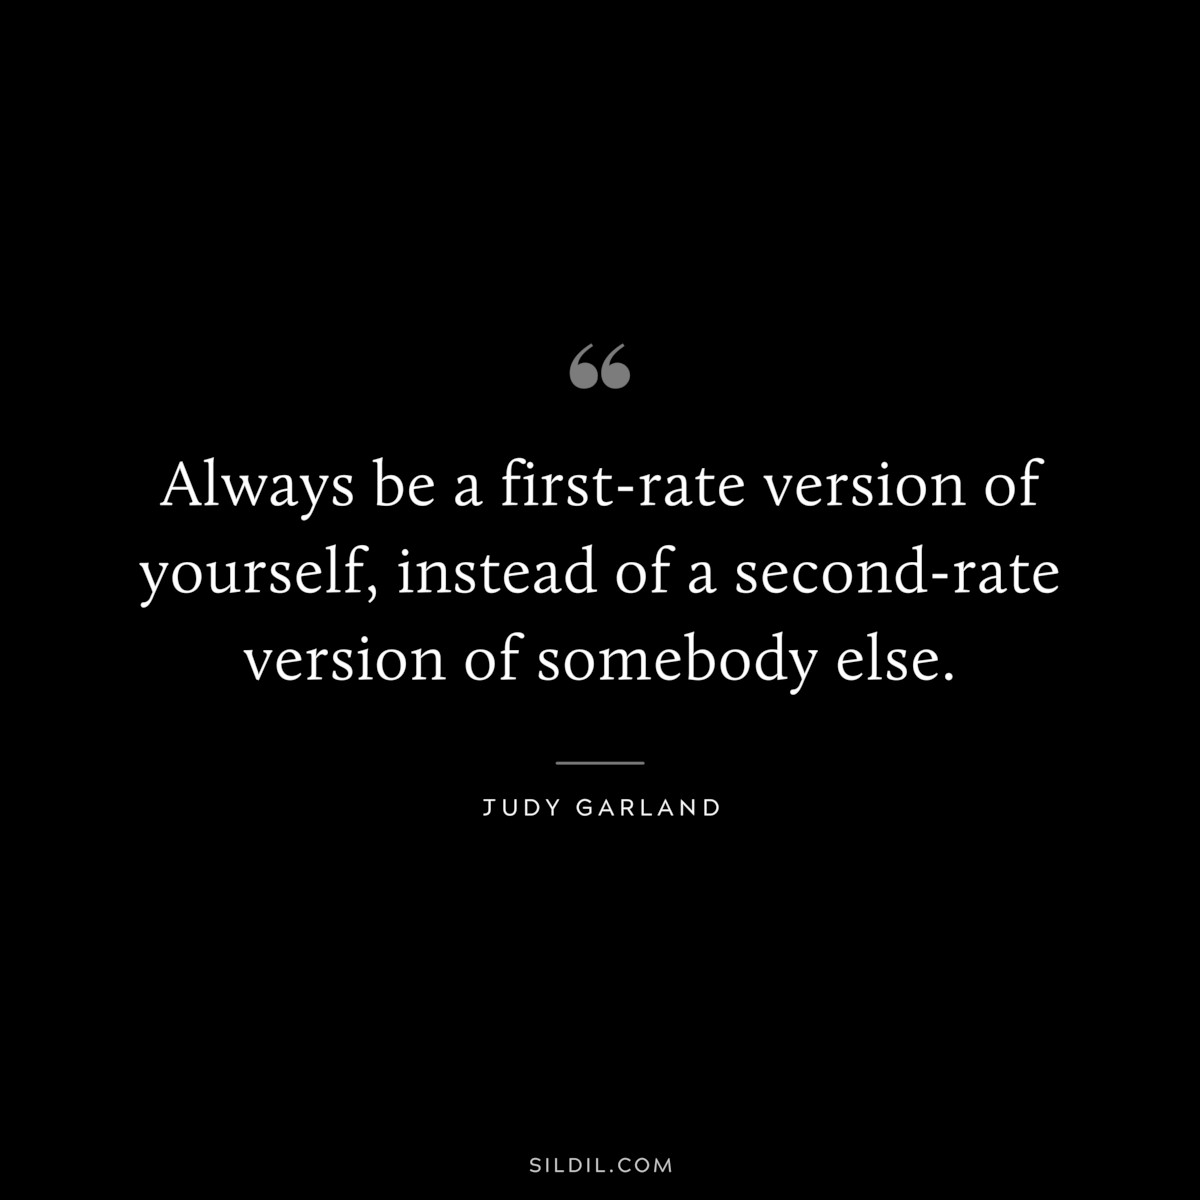 Always be a first-rate version of yourself, instead of a second-rate version of somebody else. ― Judy Garland